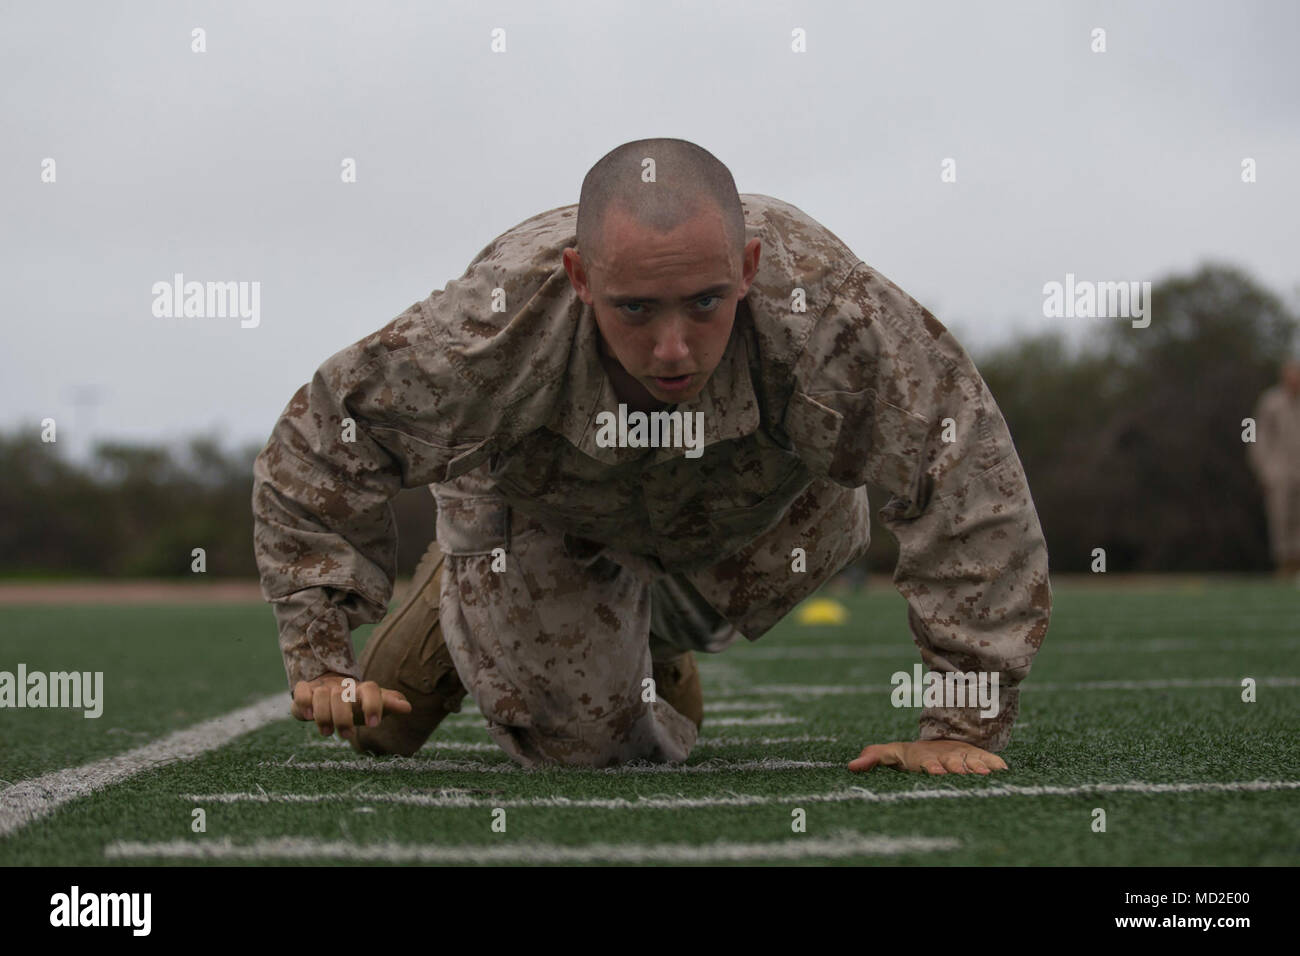 A recruit with Echo Company, 2nd Recruit Training Battalion, performs a high crawl during a combat fitness test at Marine Corps Recruit Depot San Diego, March 23. This is part of the maneuver under fire portion of the event, which simulates moving and maintaining a low profile in combat. Annually, more than 17,000 males recruited from the Western Recruiting Region are trained at MCRD San Diego. Echo Company is scheduled to graduate May 11. Stock Photo